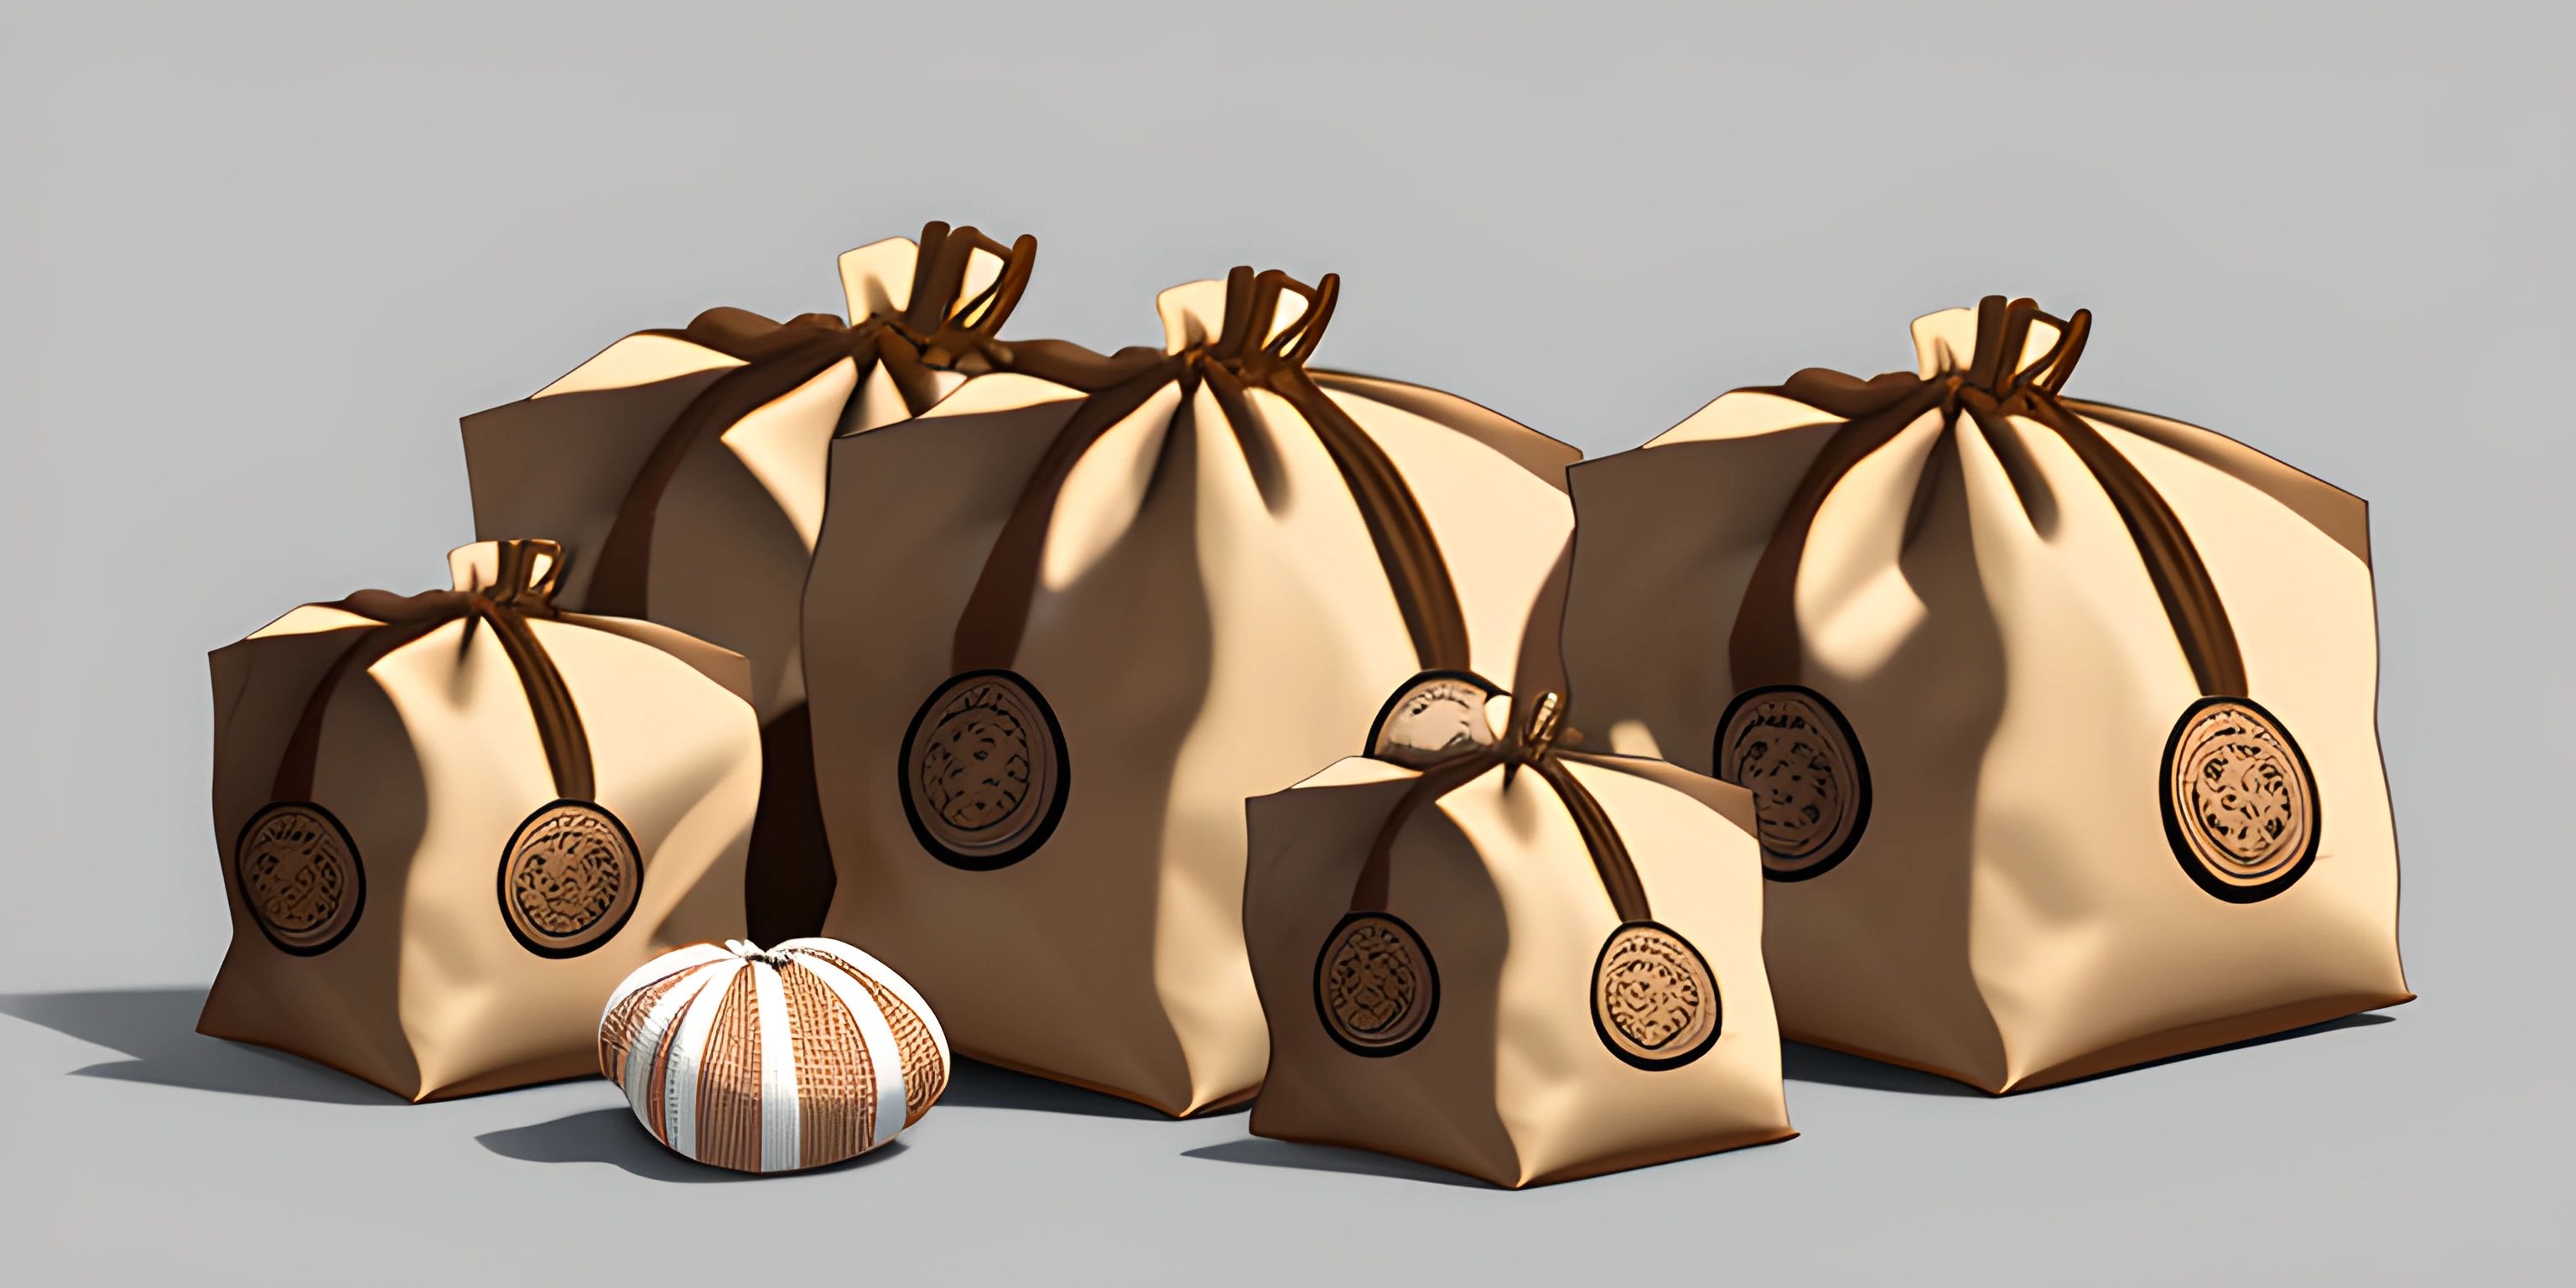 several bags, one with an oval shaped cake in them, all lined up with chocolate candiltout